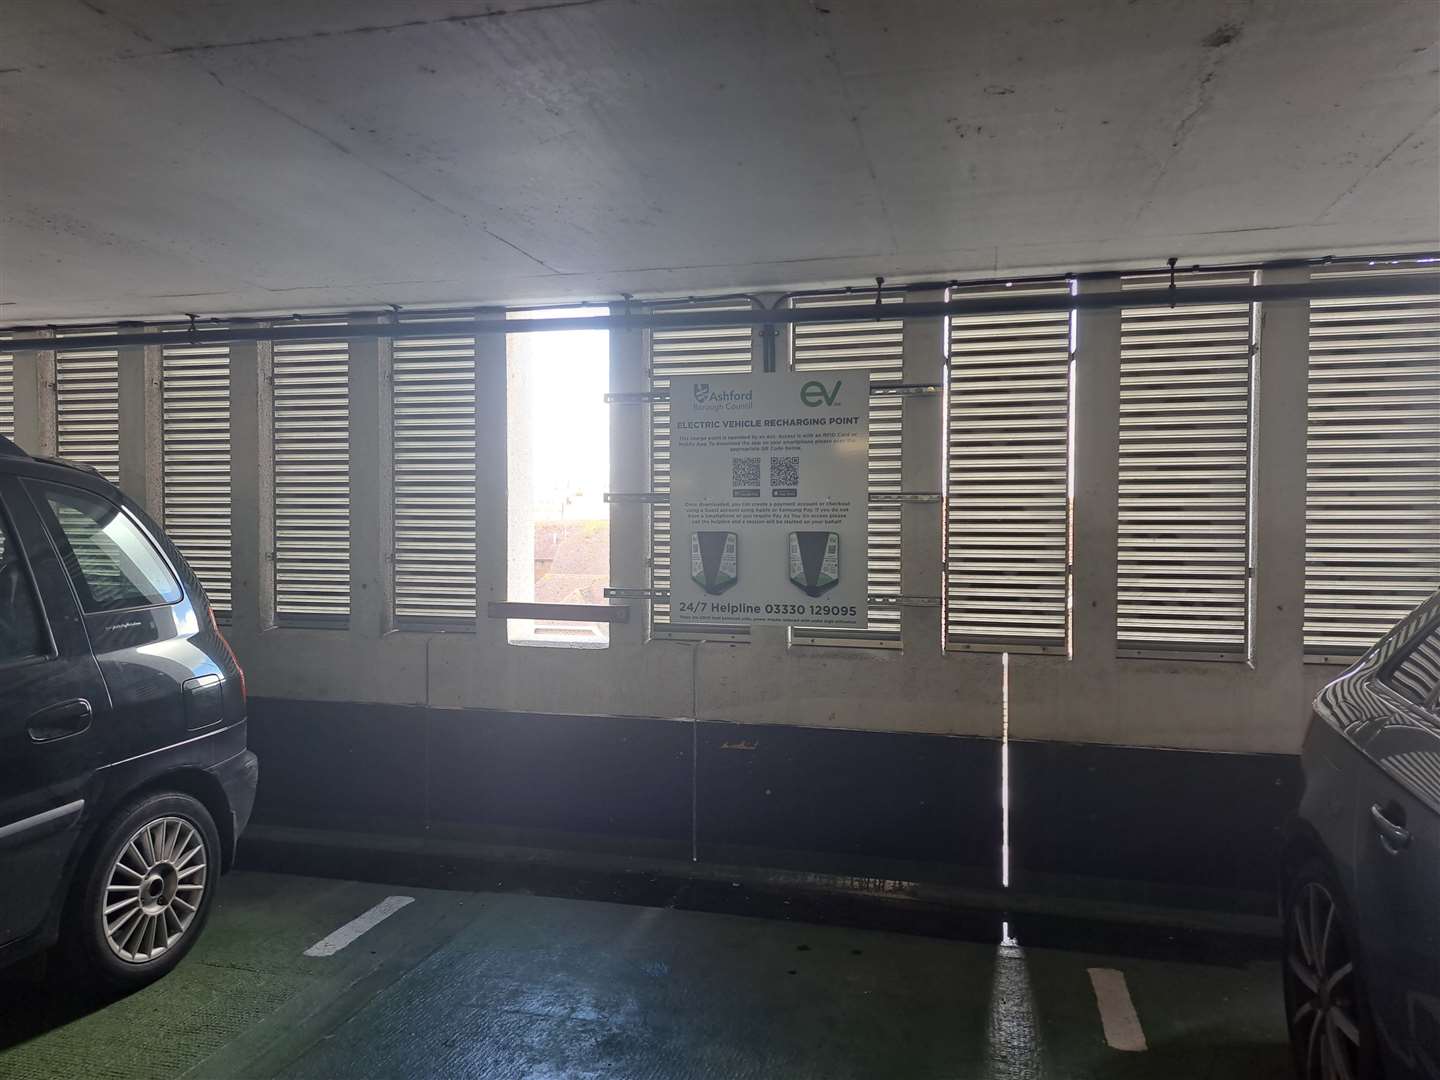 Six EV charging points have been installed across 12 bays